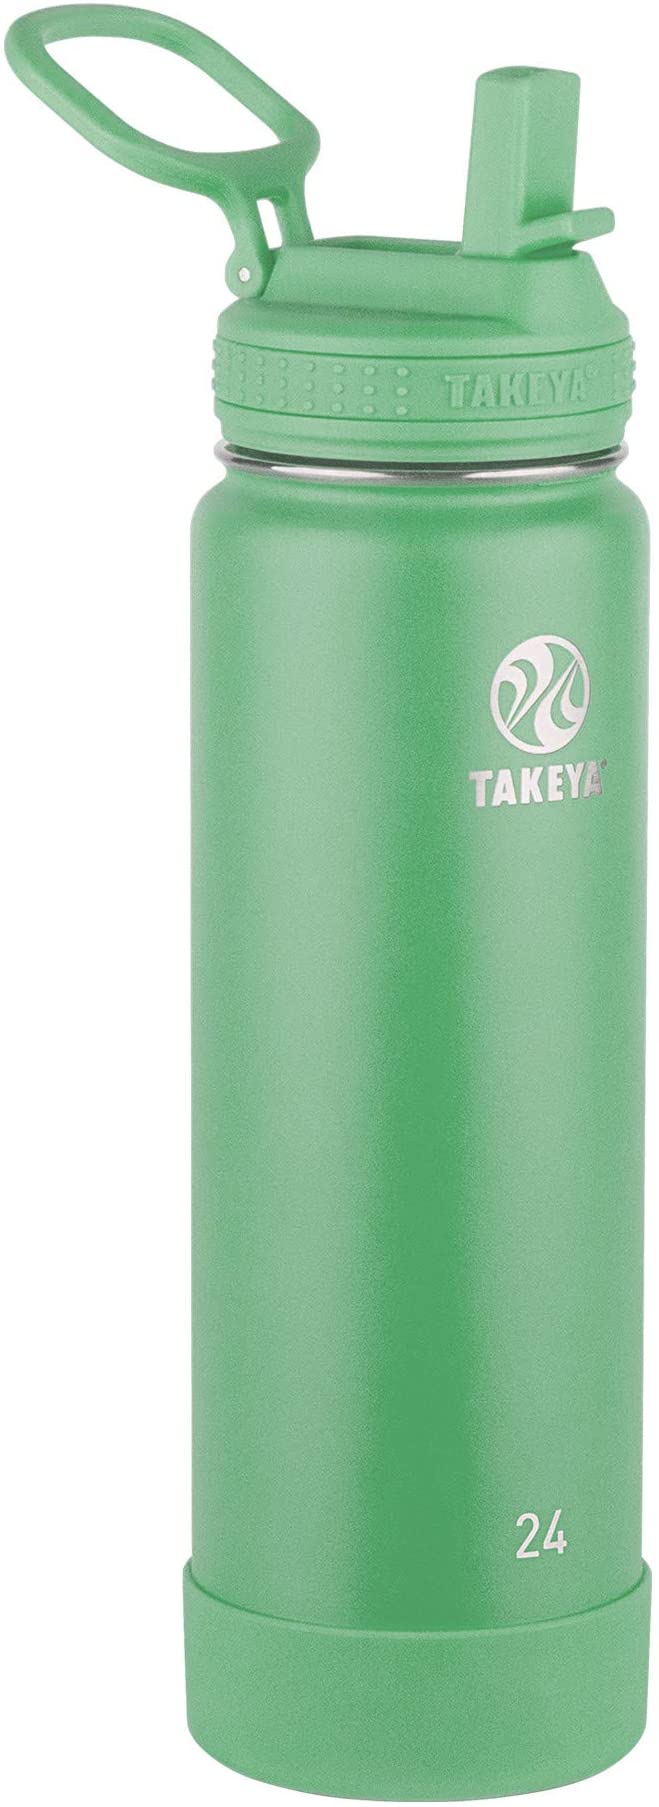 Takeya Actives Insulated Water Bottle w/Straw Lid, Mint, 24 Ounces